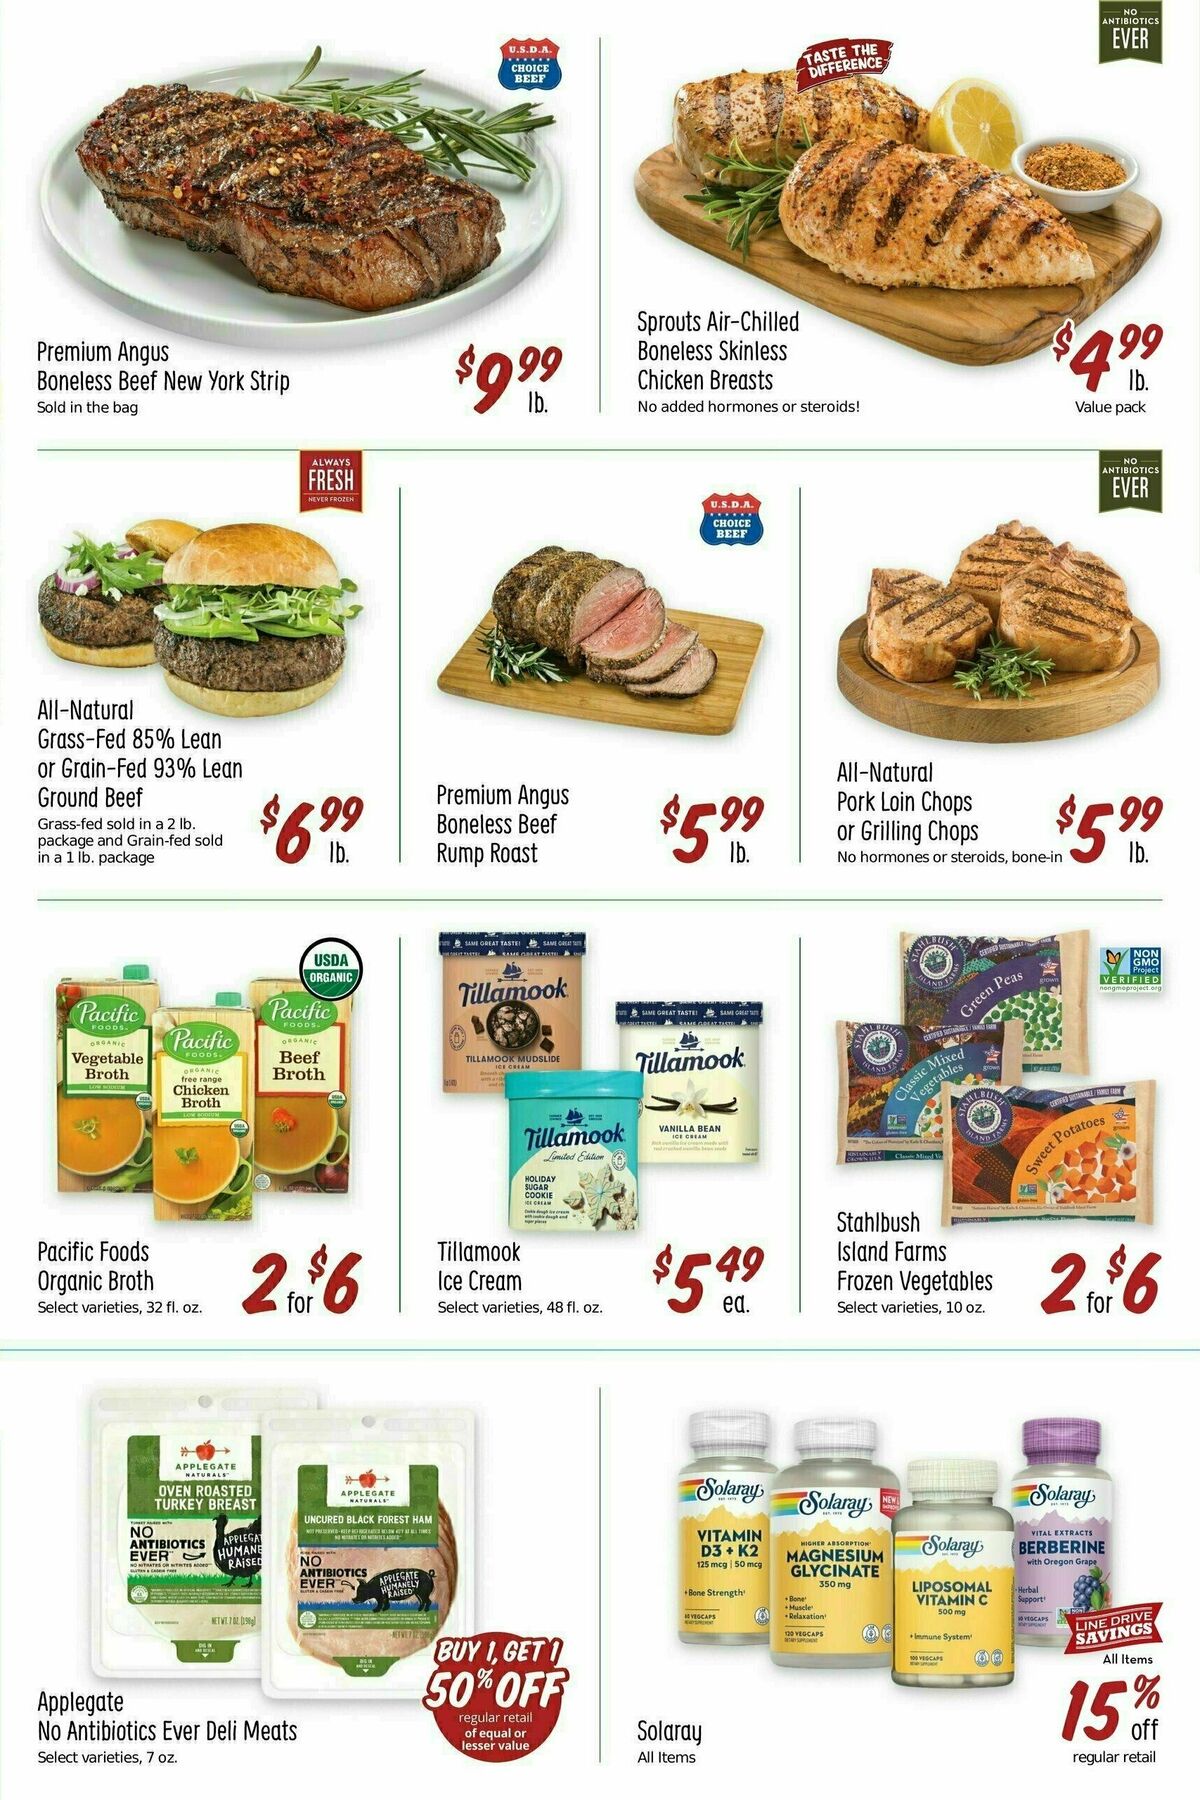 Sprouts Farmers Market Weekly Ad from November 8